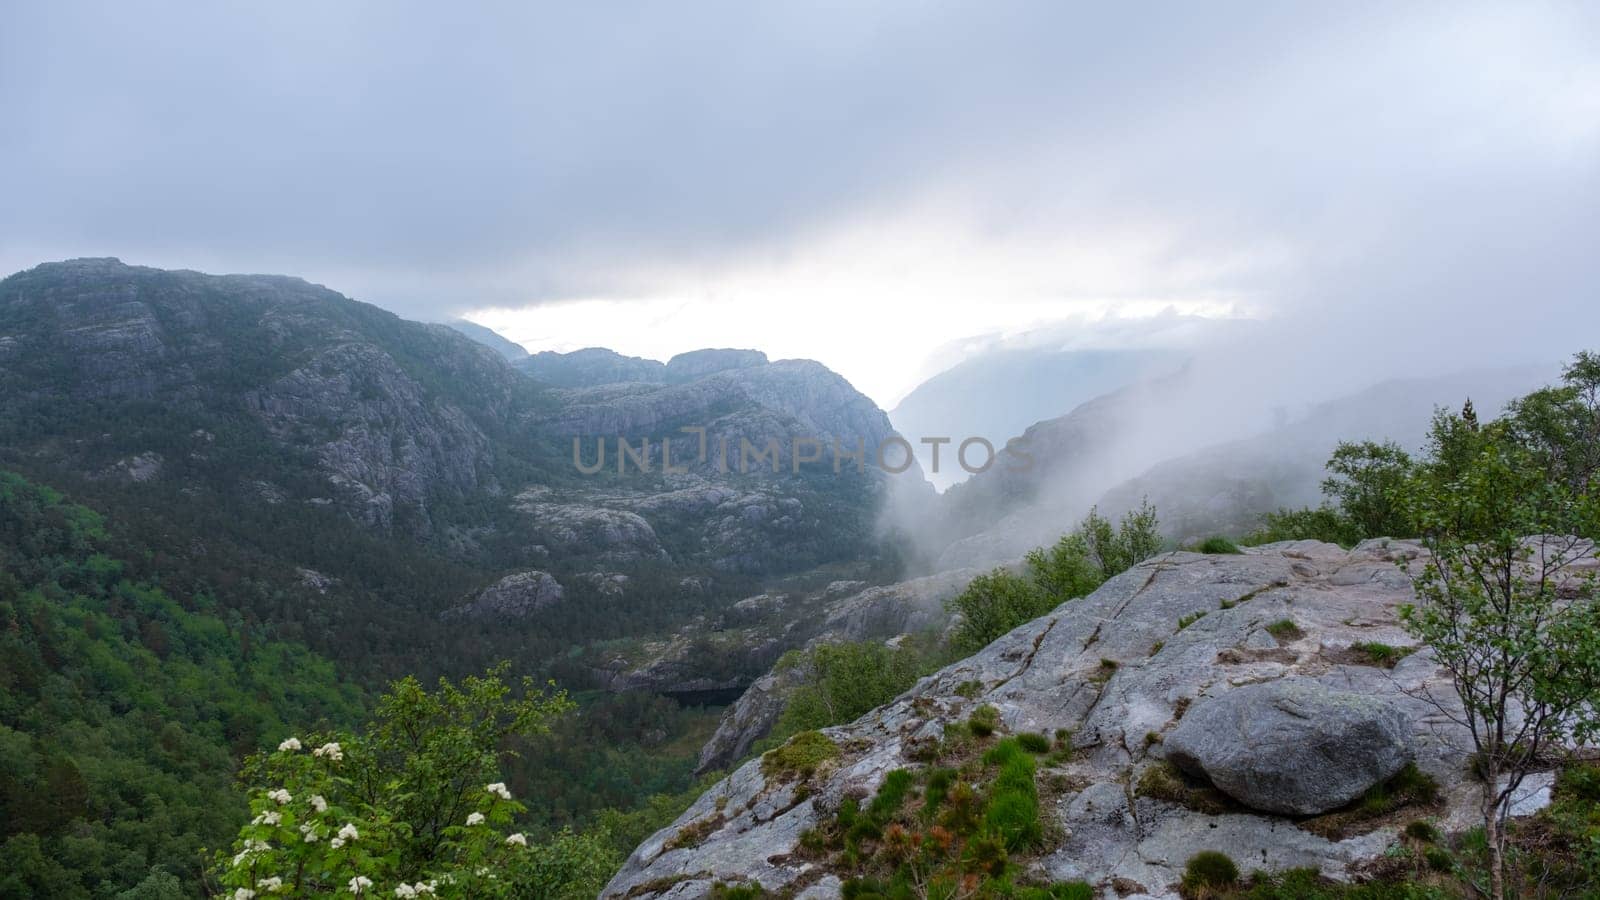 A view of a misty mountain valley in Norway on a summer day. The valley is shrouded in fog, with the peaks of the surrounding mountains rising up through the clouds. Preikestolen, Norway